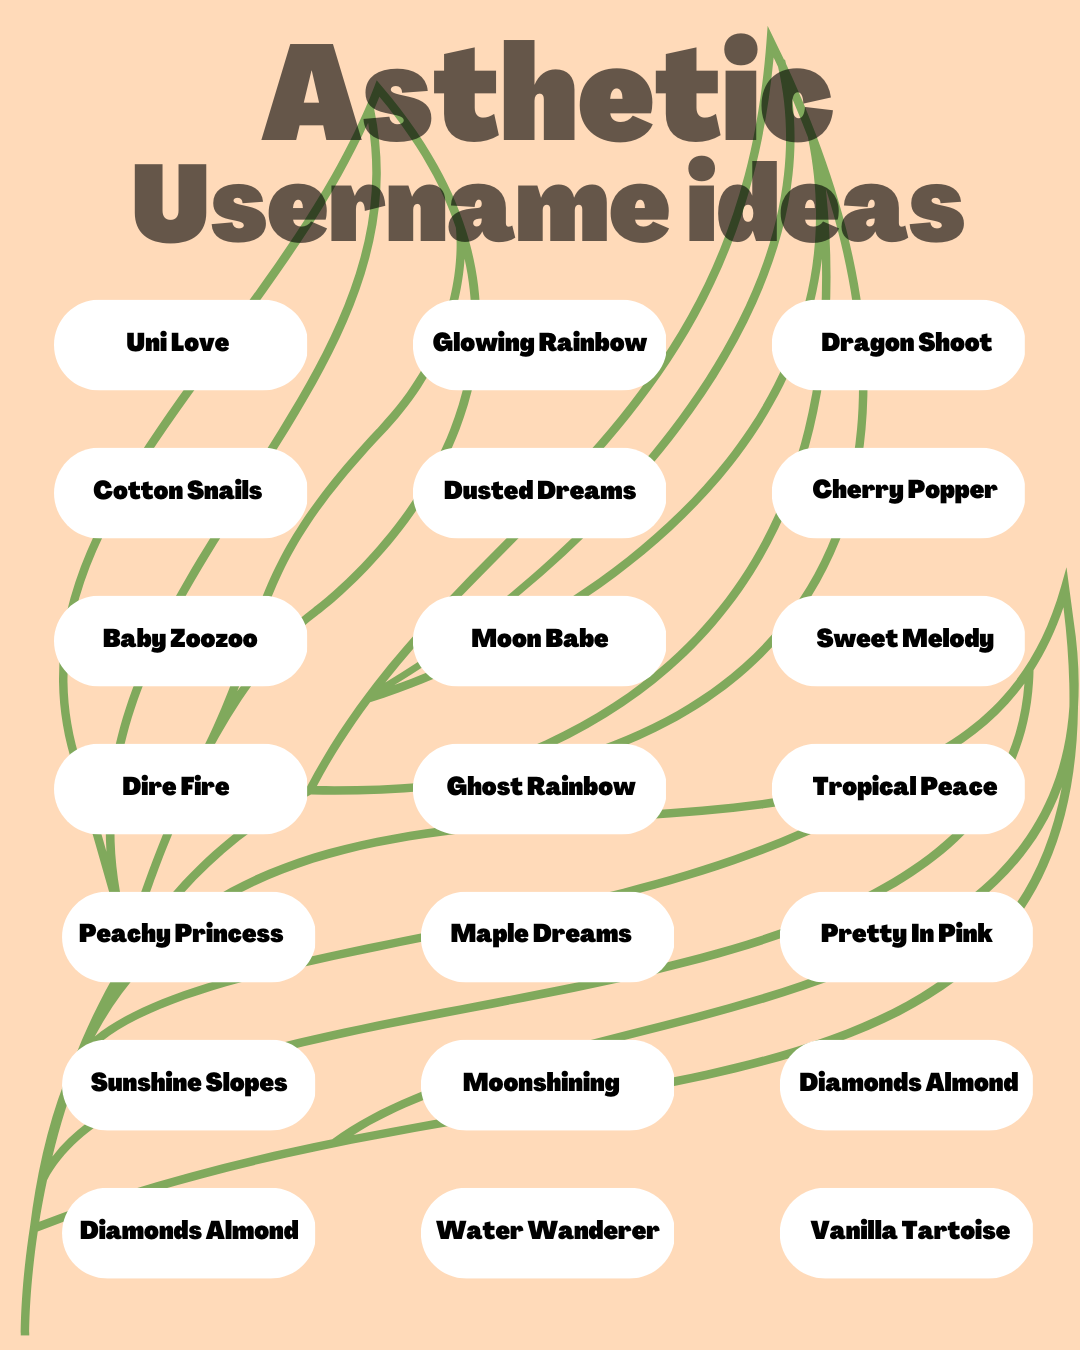 Remote.tools shares a list of asthetic username ideas for your social media profiles.